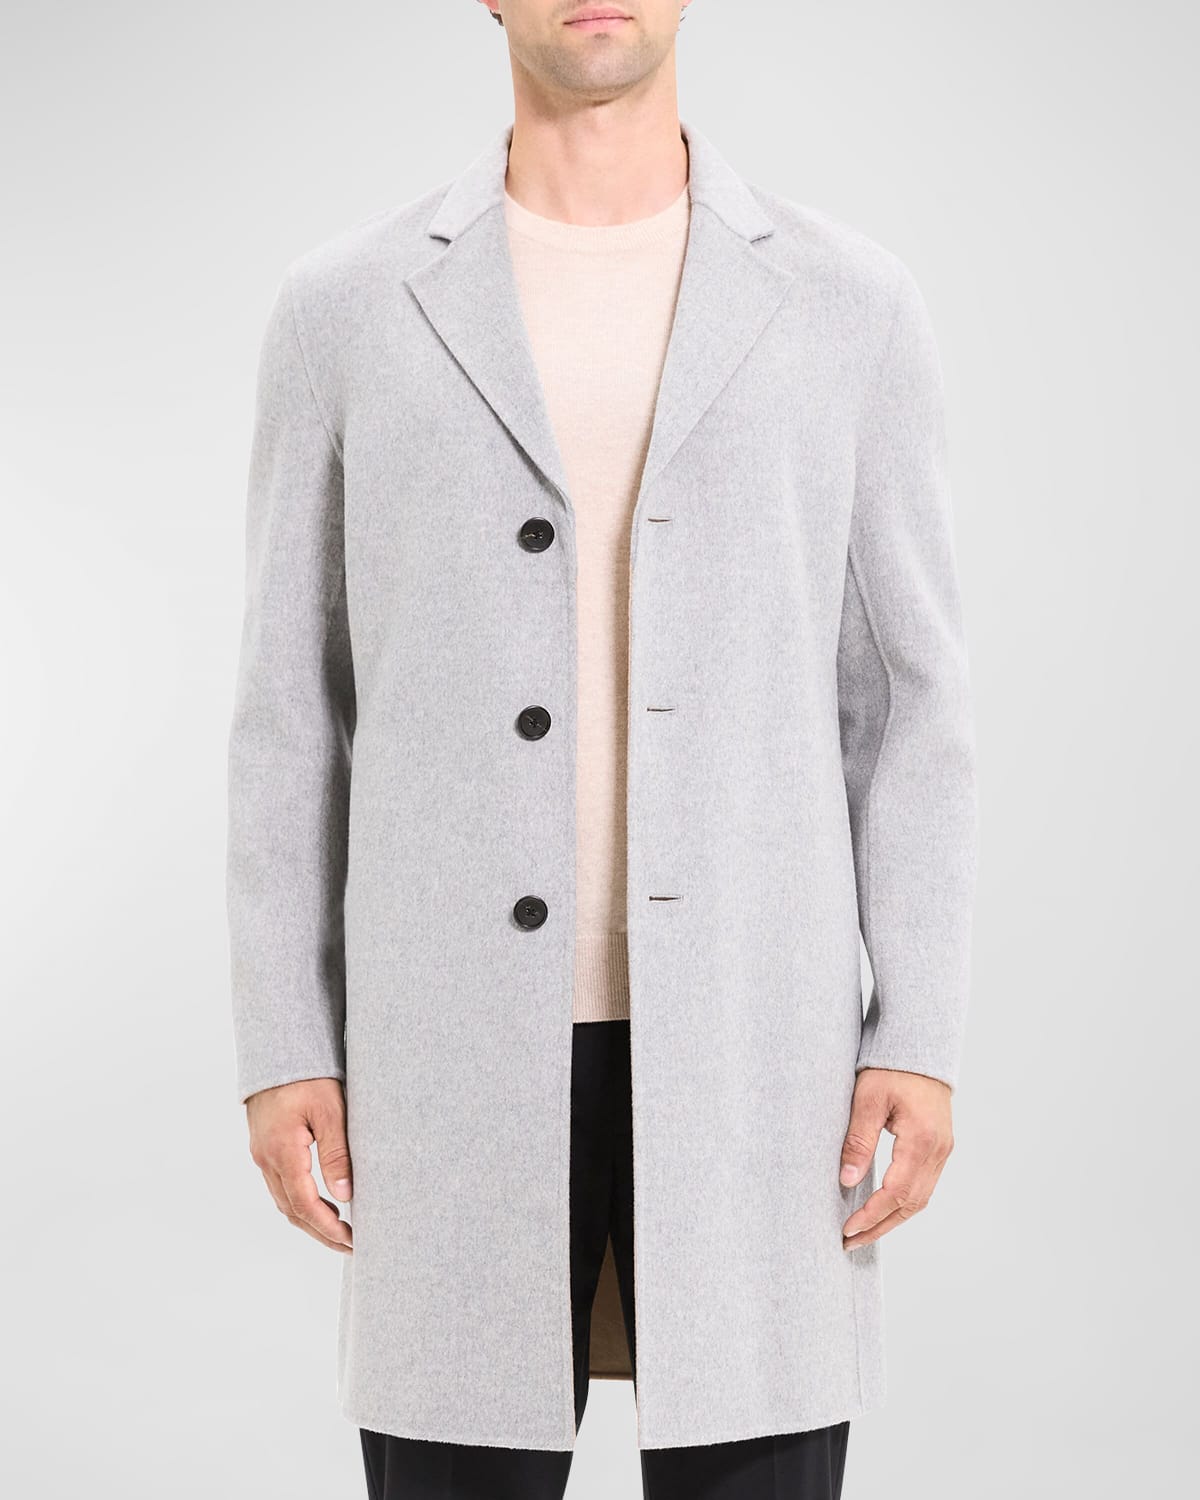 THEORY MEN'S NEW DIVIDE WOOL-CASHMERE TOPCOAT